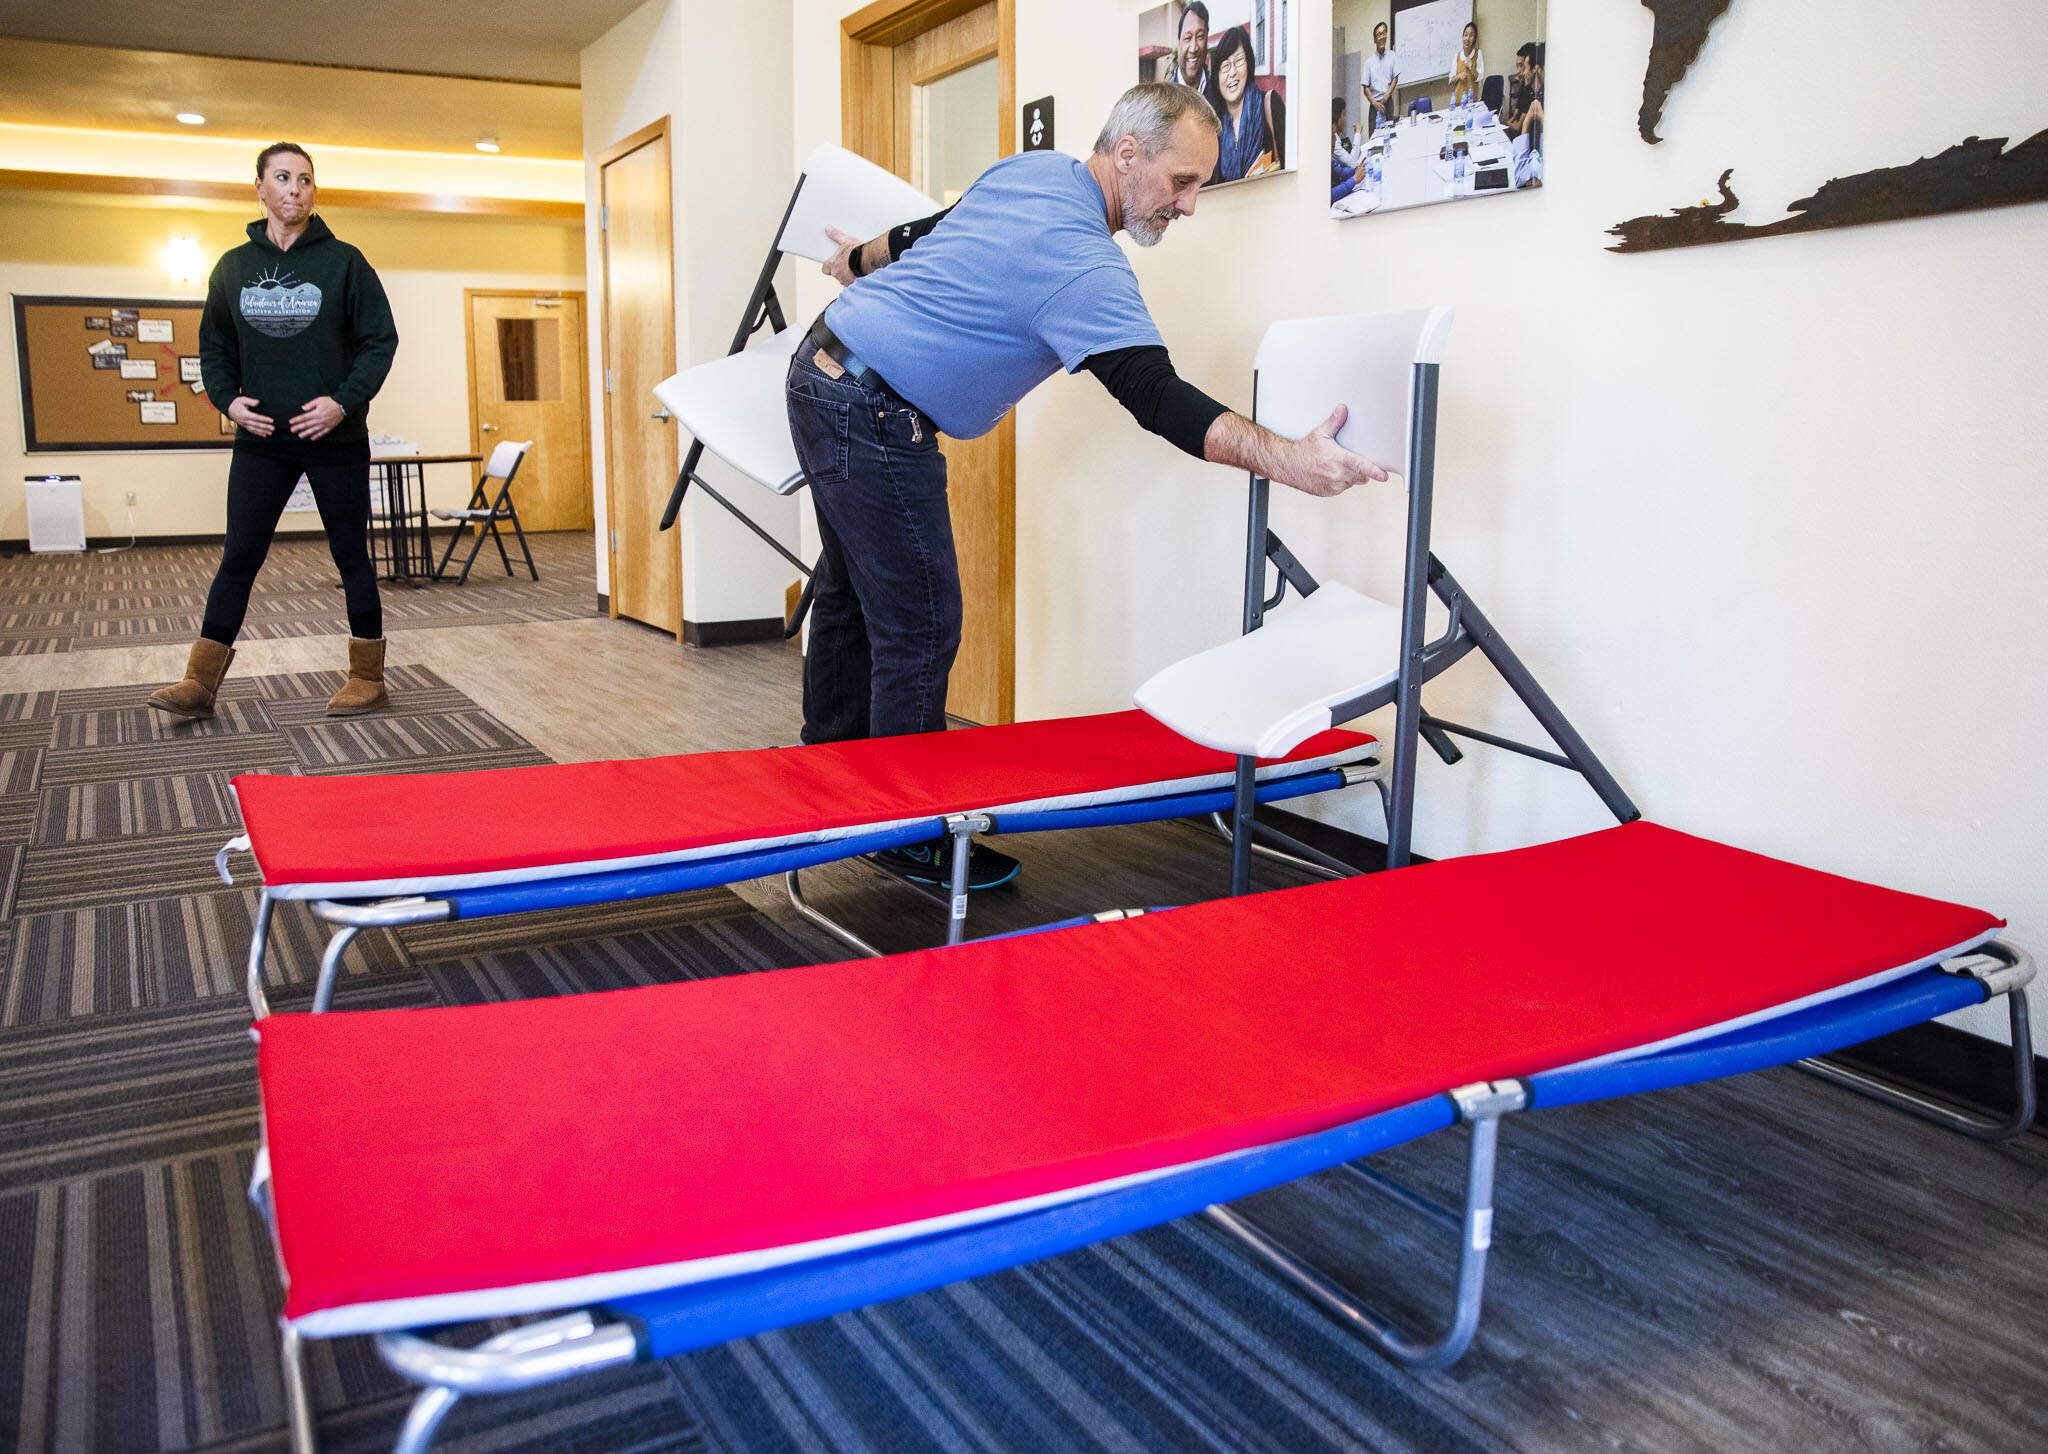 Roger Evans, New Hope Fellowship Church shelter coordinator, sets up two cots as examples of what is available to those that seek shelter at the church on Tuesday, Nov. 15, 2022 in Monroe, Washington. (Olivia Vanni / The Herald)